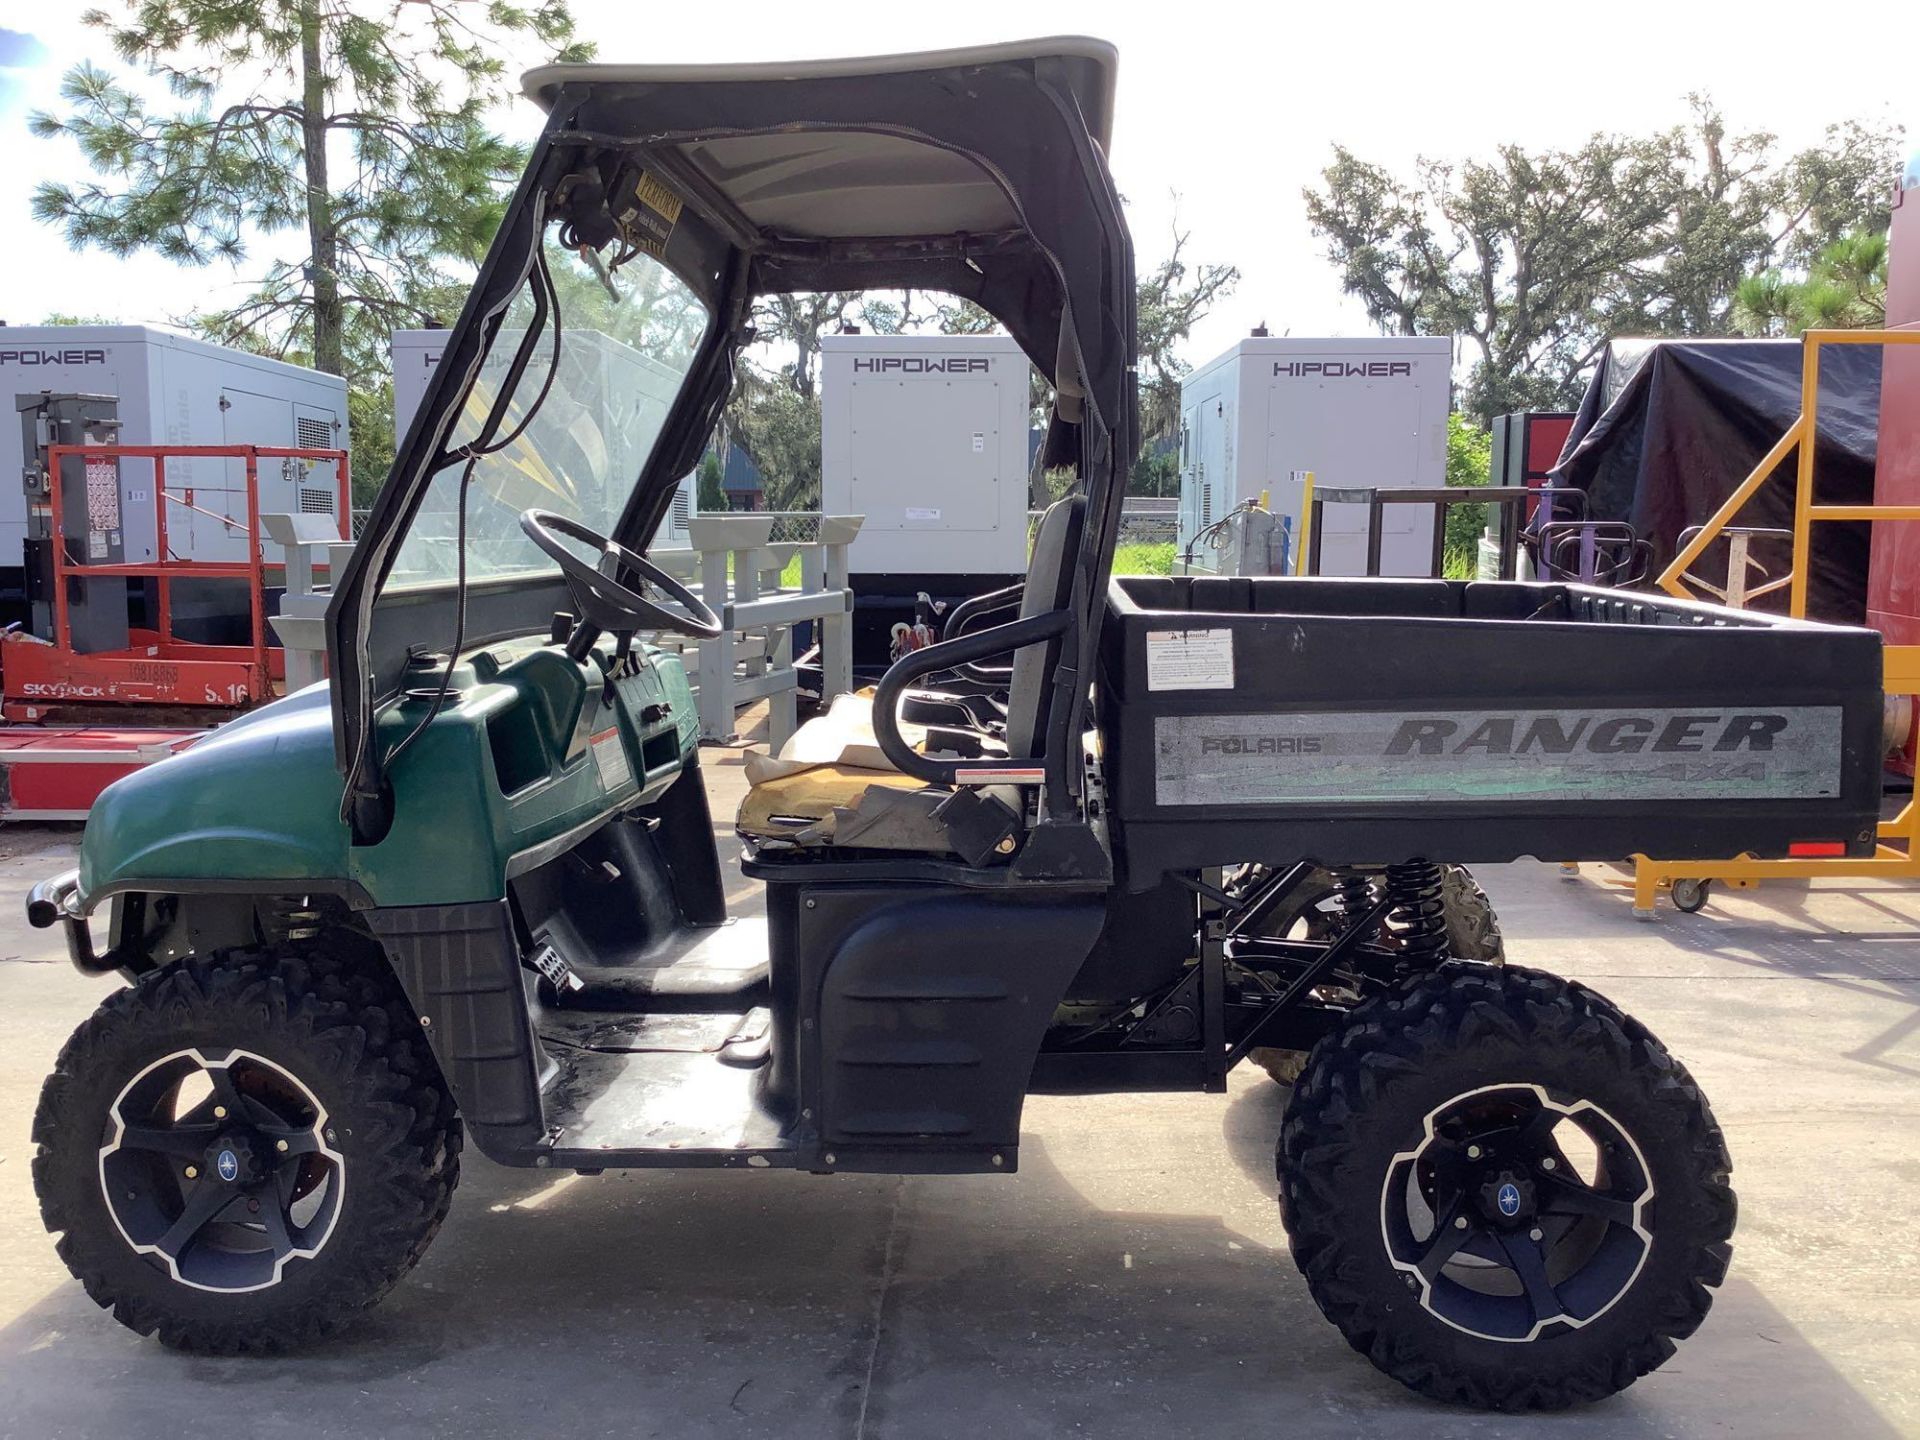 POLARIS RANGER 4x4, GAS POWERED, AWD, HITCH ON BACK, MANUAL DUMP BED, WINDSHIELD WIPER, RUNS AND OPE - Image 3 of 14